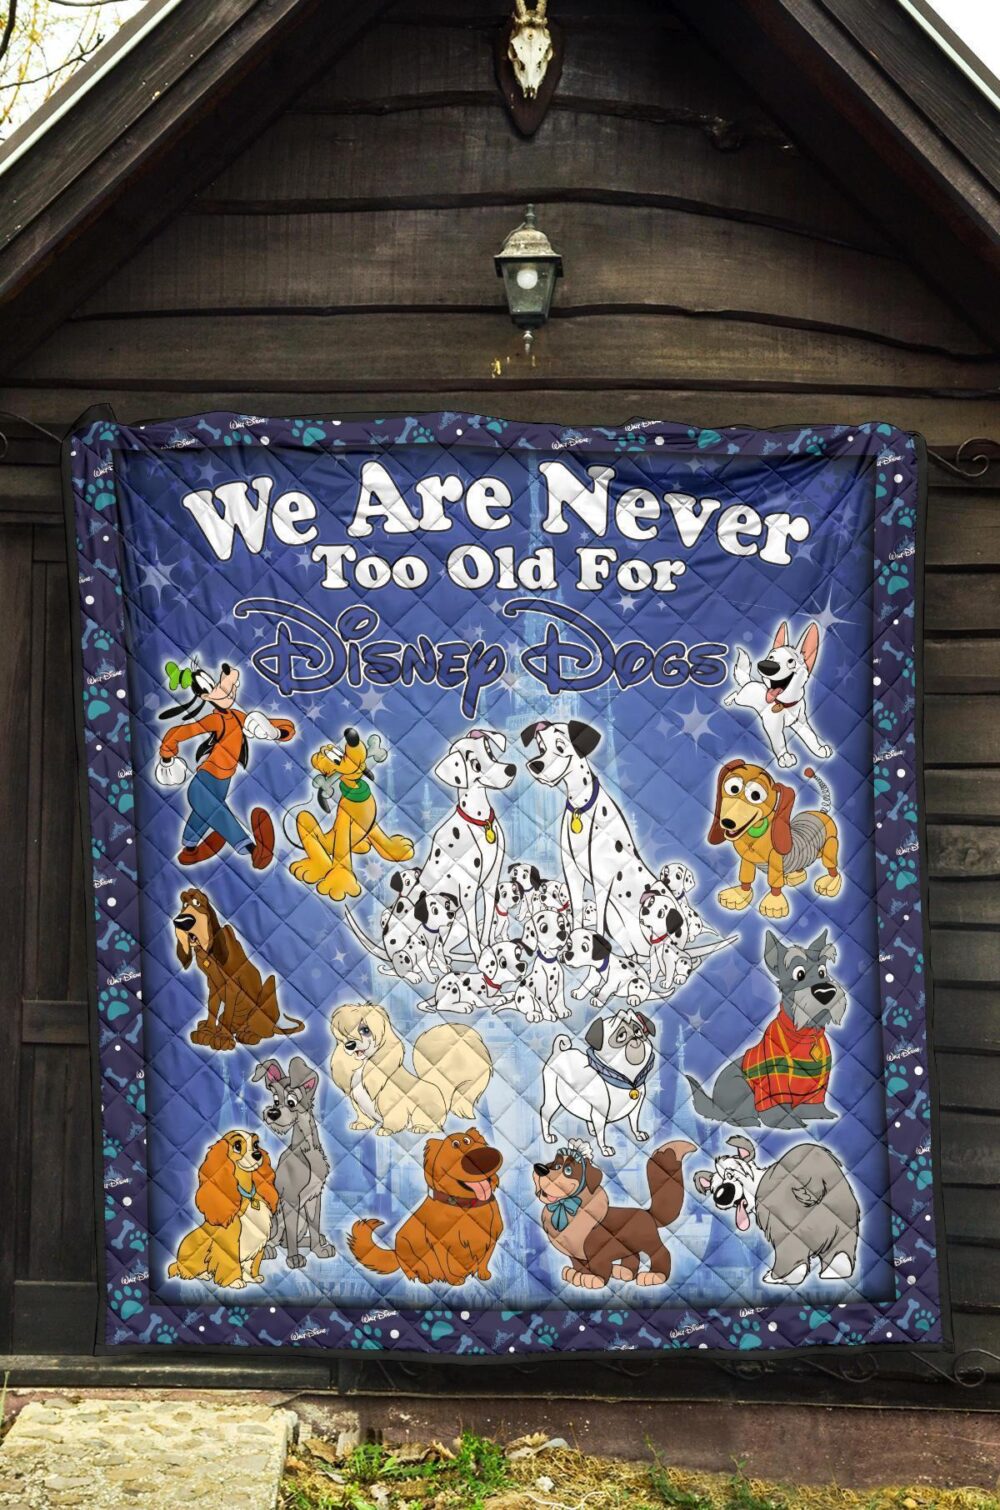 DN Dogs Quilt Blanket We Are Never Too Old Fan Gift Idea